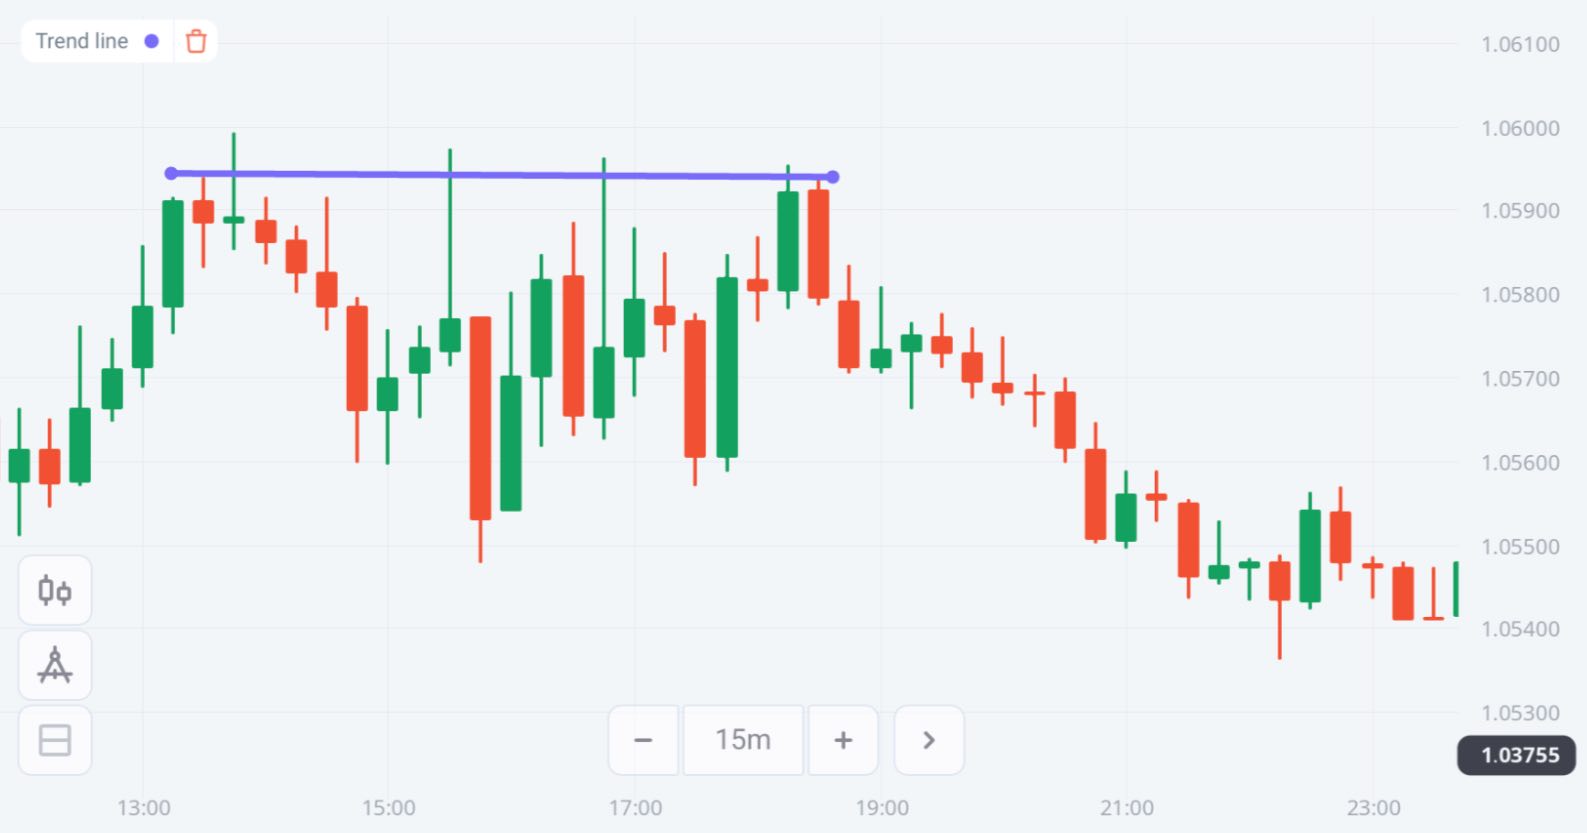 EUR/USD price chart with a resistance level indicated